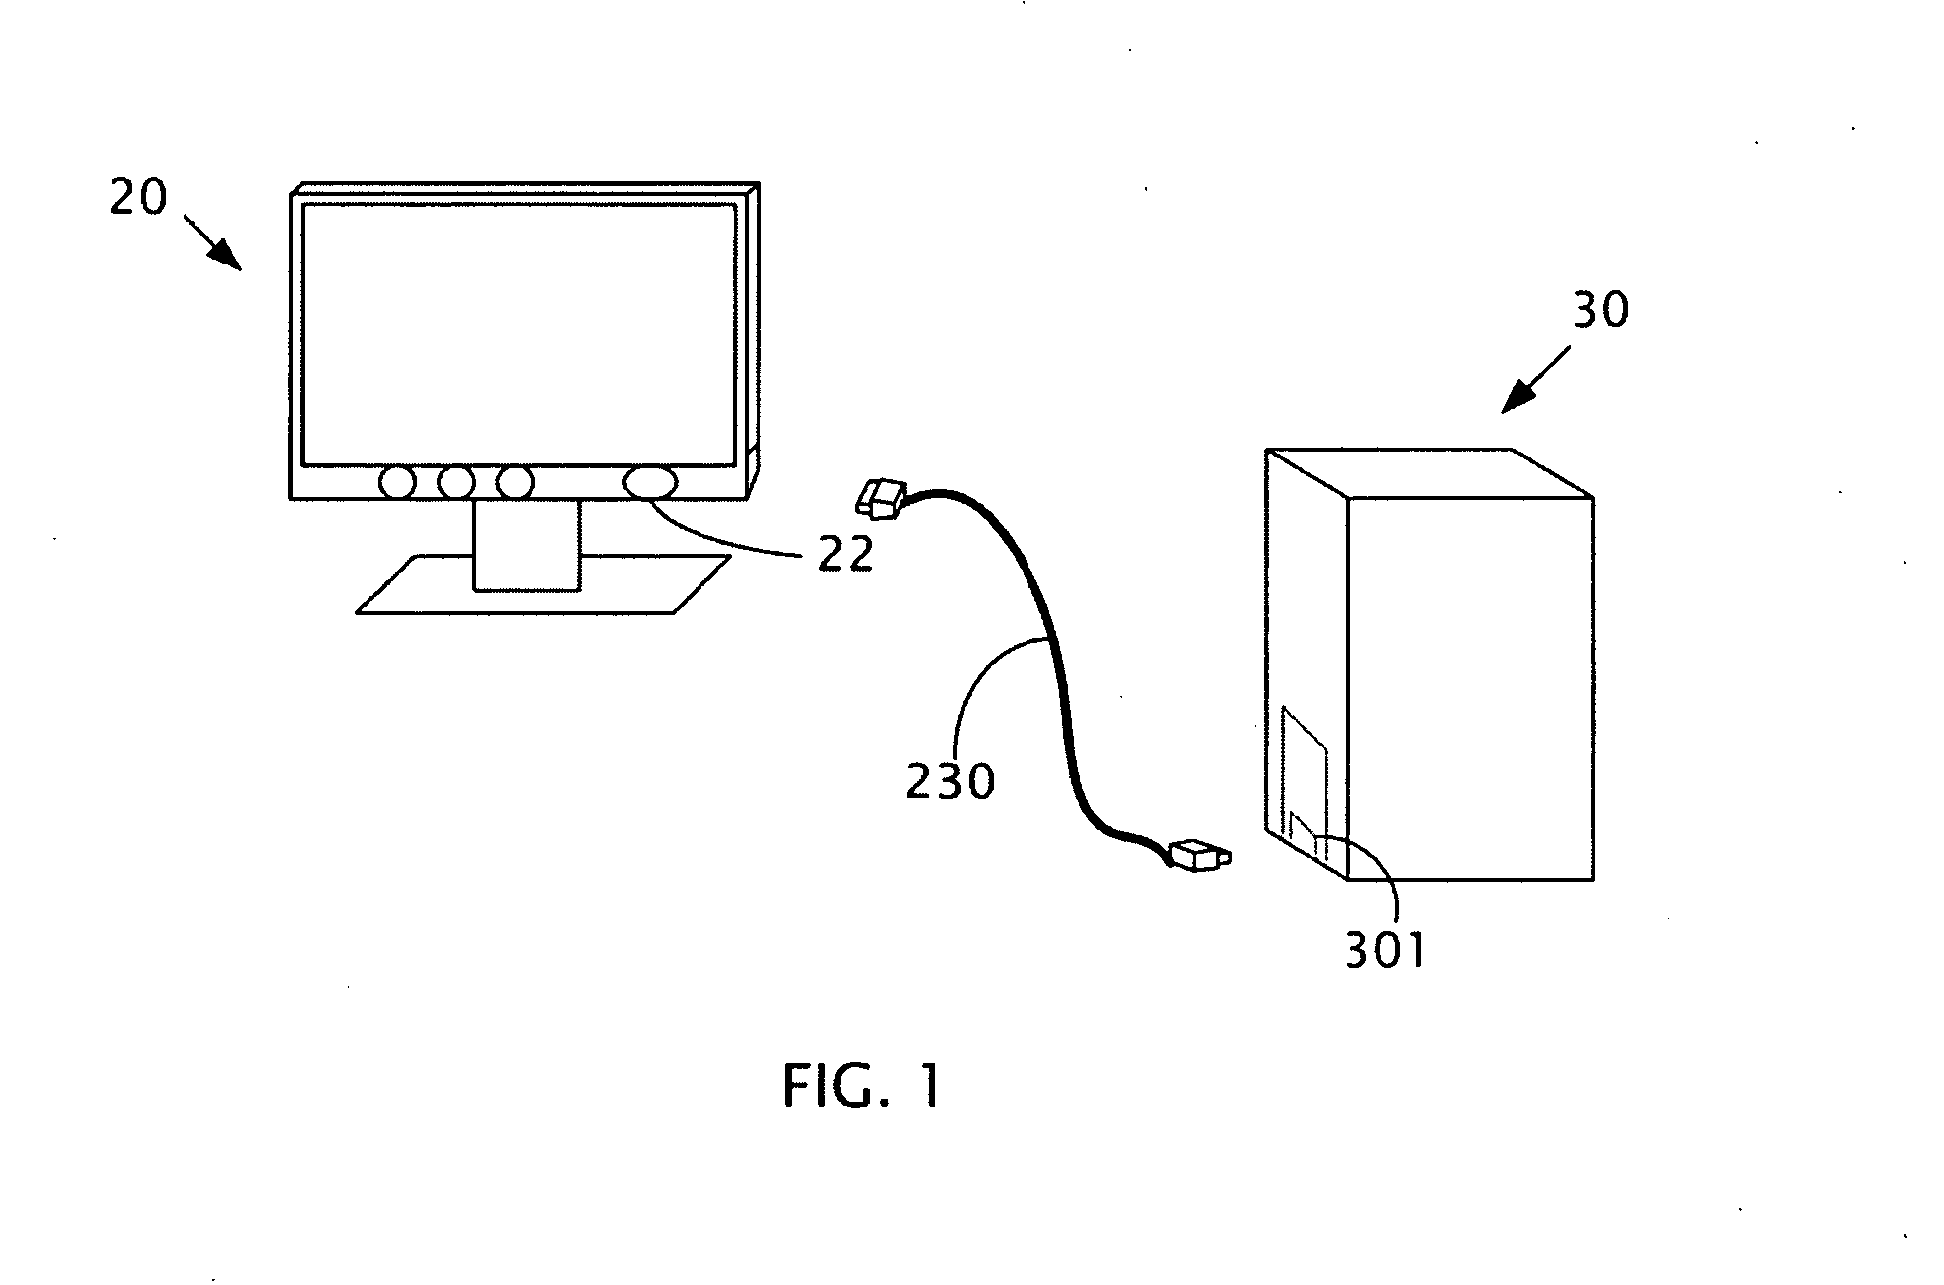 Display, computer system and method for controlling a computer to fall asleep